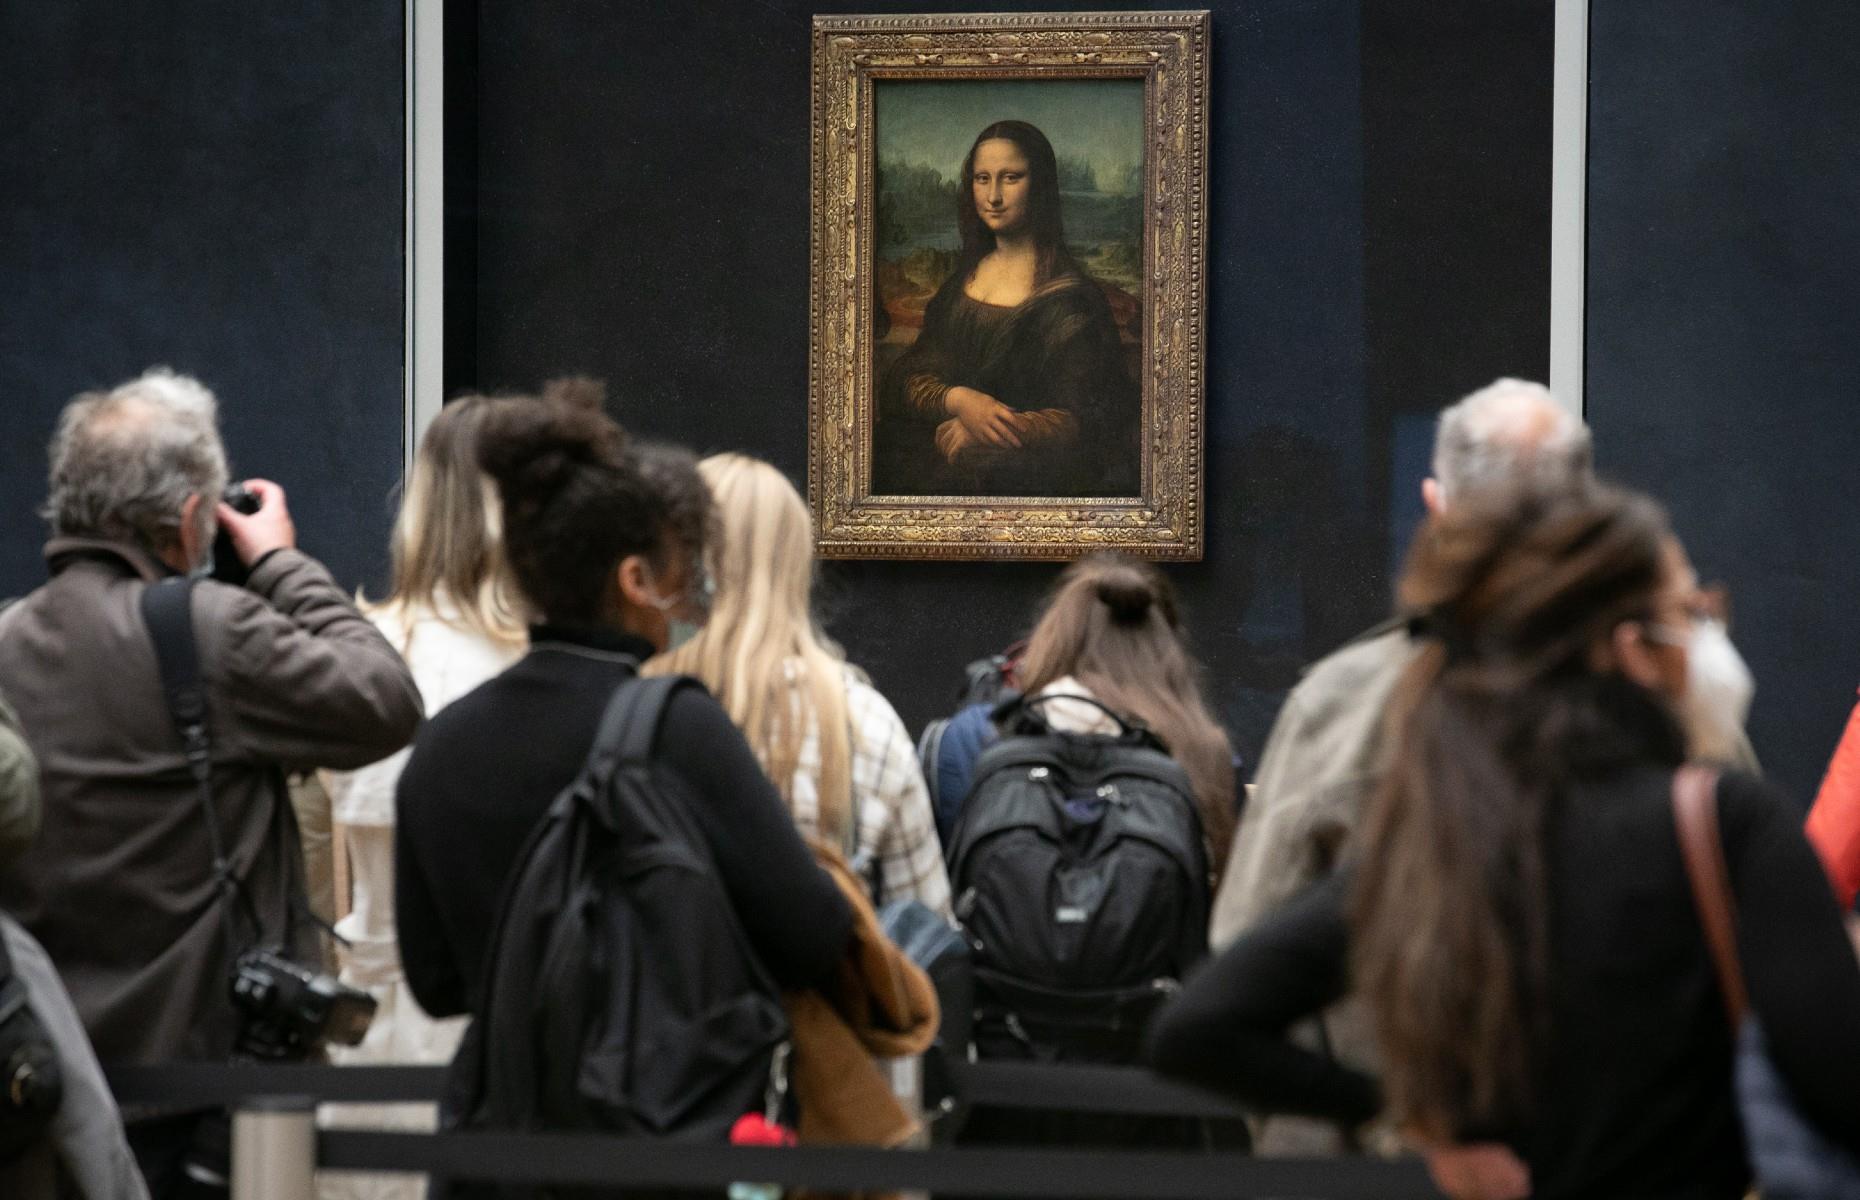 <p>Today the painting is in the Louvres Salle des Etats, displayed behind bulletproof glass. The painting is illuminated by a specially-designed lamp that reduces infrared and ultraviolet radiation that could otherwise damage the paintwork. Around 10.2 million people view the painting each year. Putting a price on an item such as the Mona Lisa is almost impossible, however in 1962 the painting was insured for $100 million; taking inflation into account that would be $860 million (£620m) in 2021.</p>